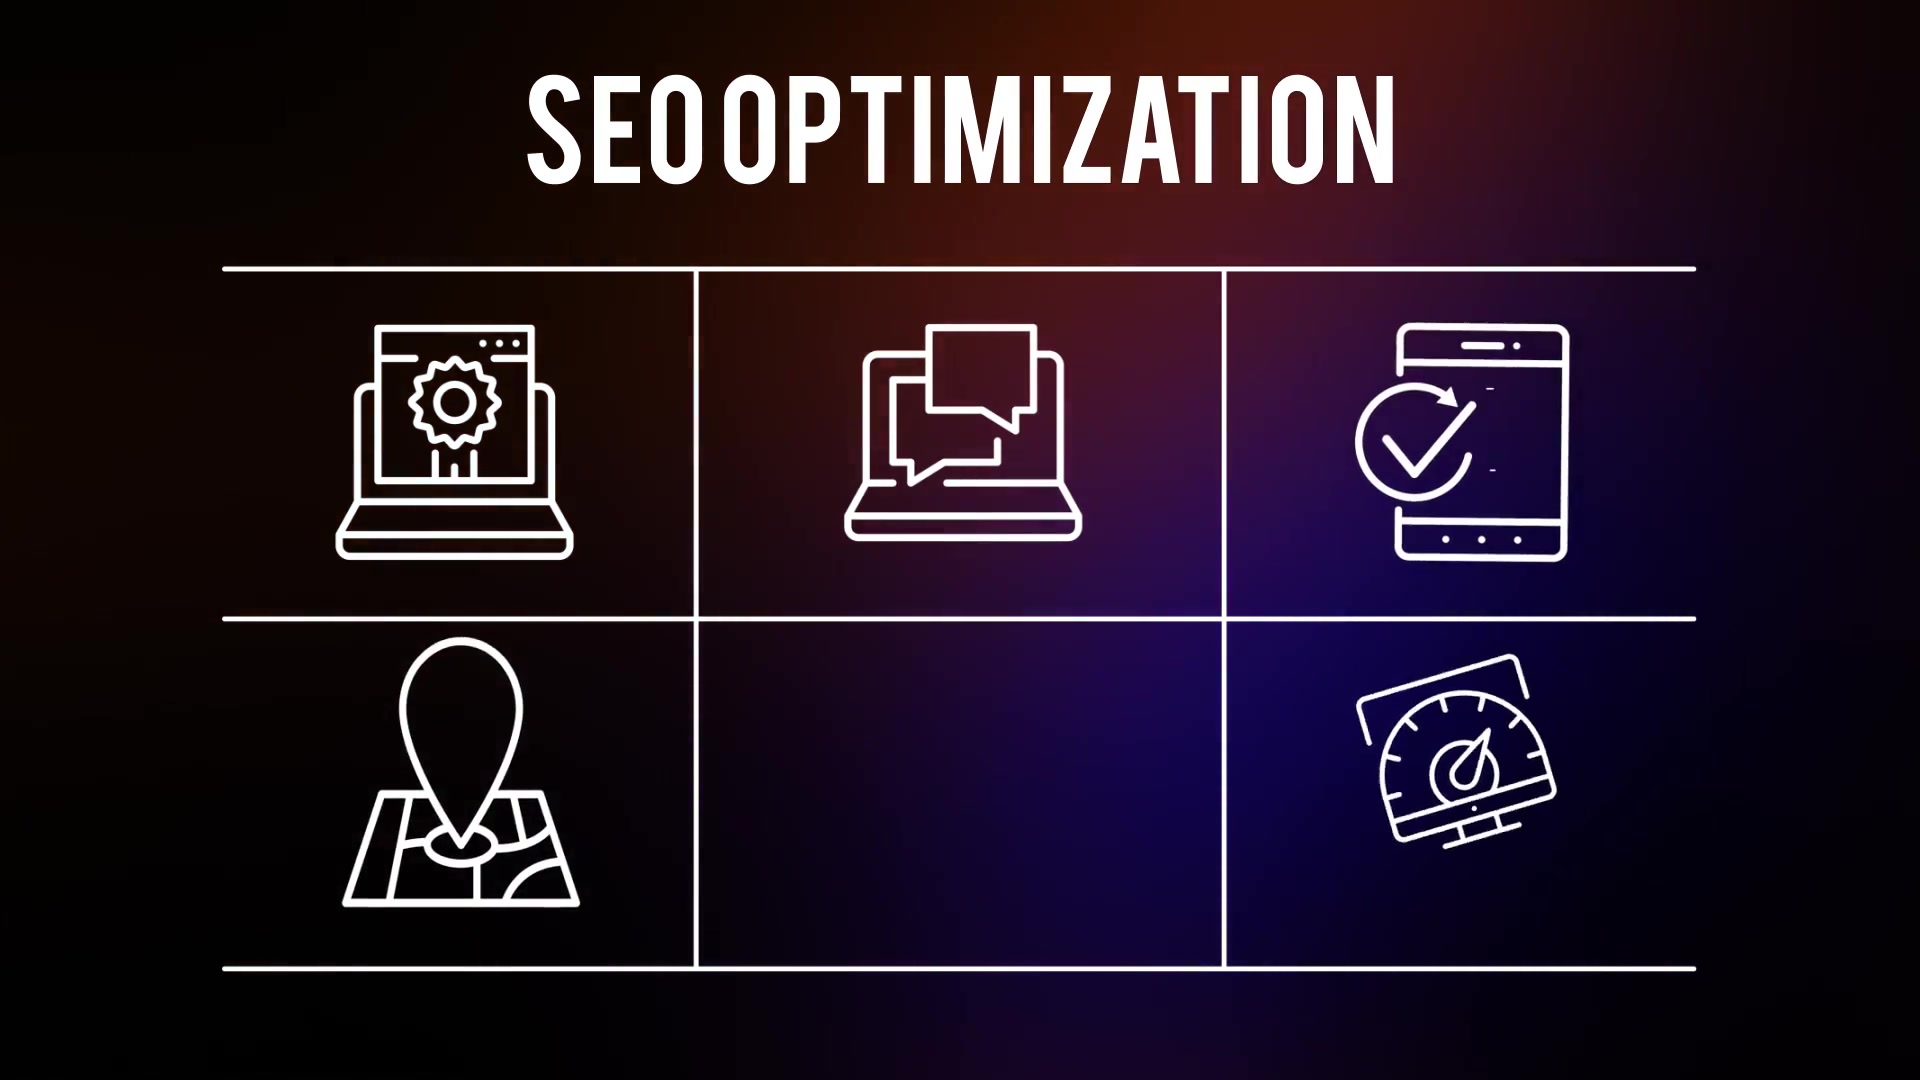 SEO Optimization 25 Outline Icons - Download Videohive 23195563